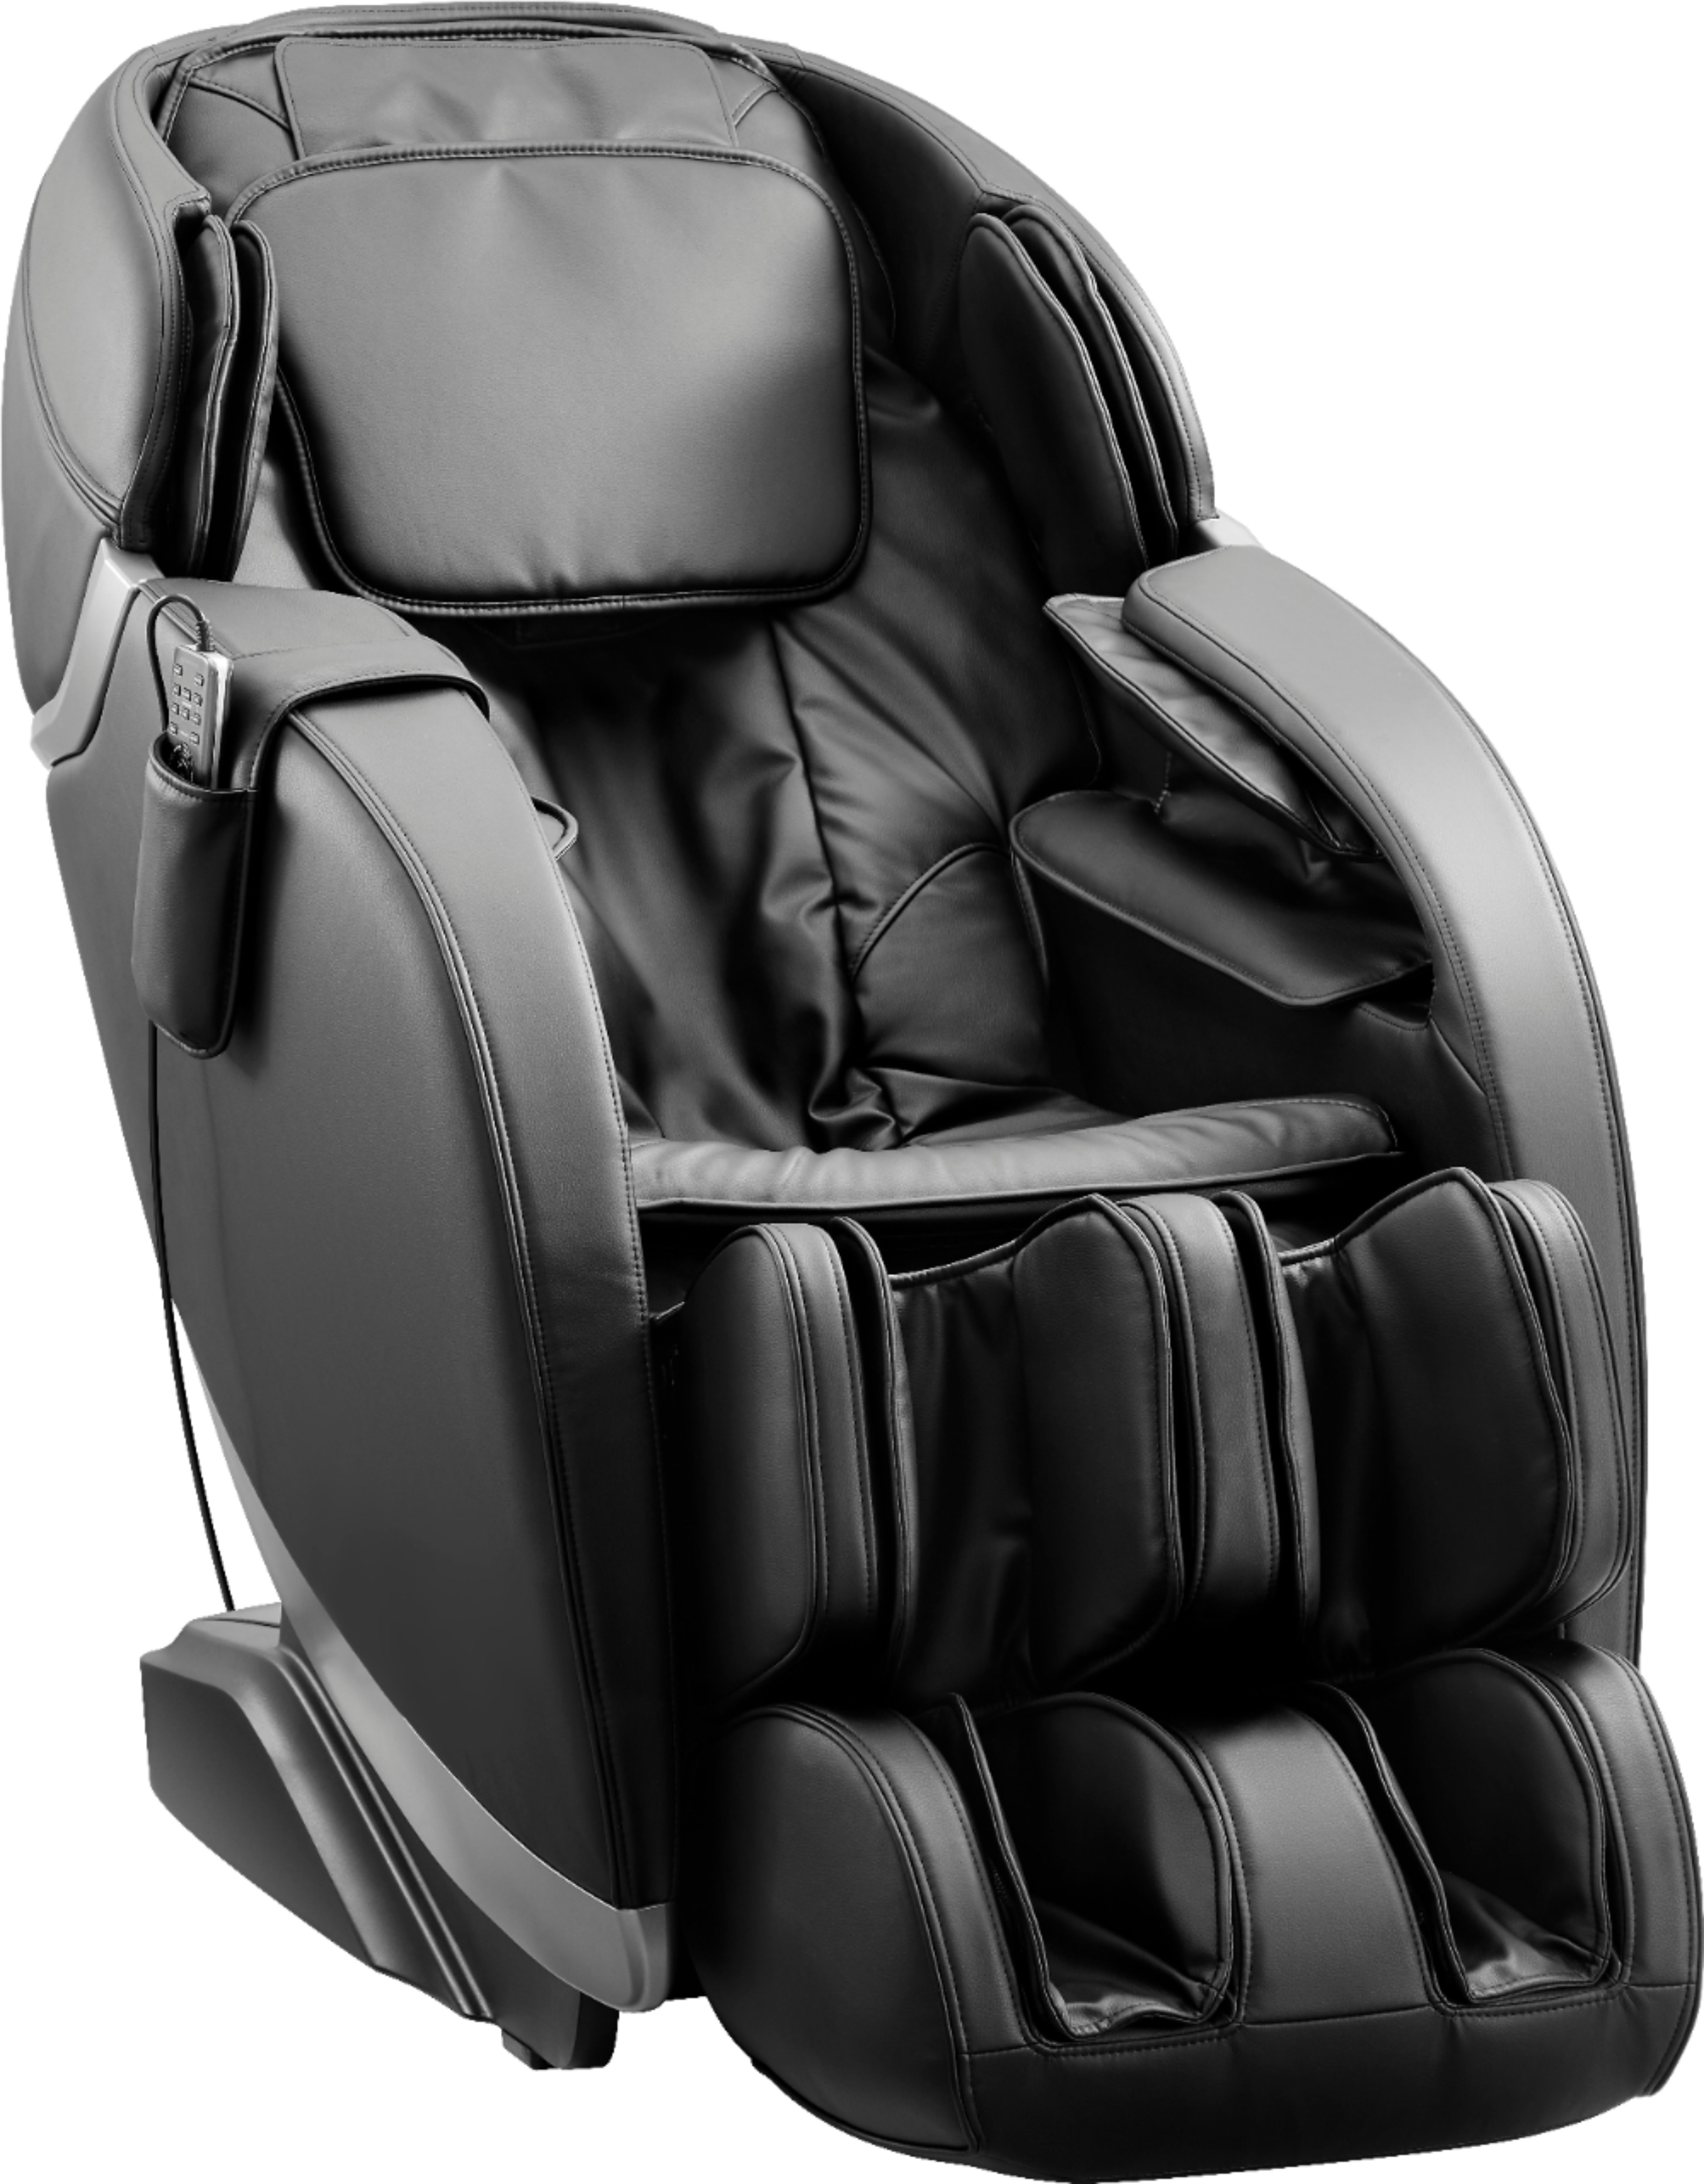 Insignia - 2D Zero Gravity Full Body Massage Chair with Free Delivery and Assembly $999.99  (3/20 only)